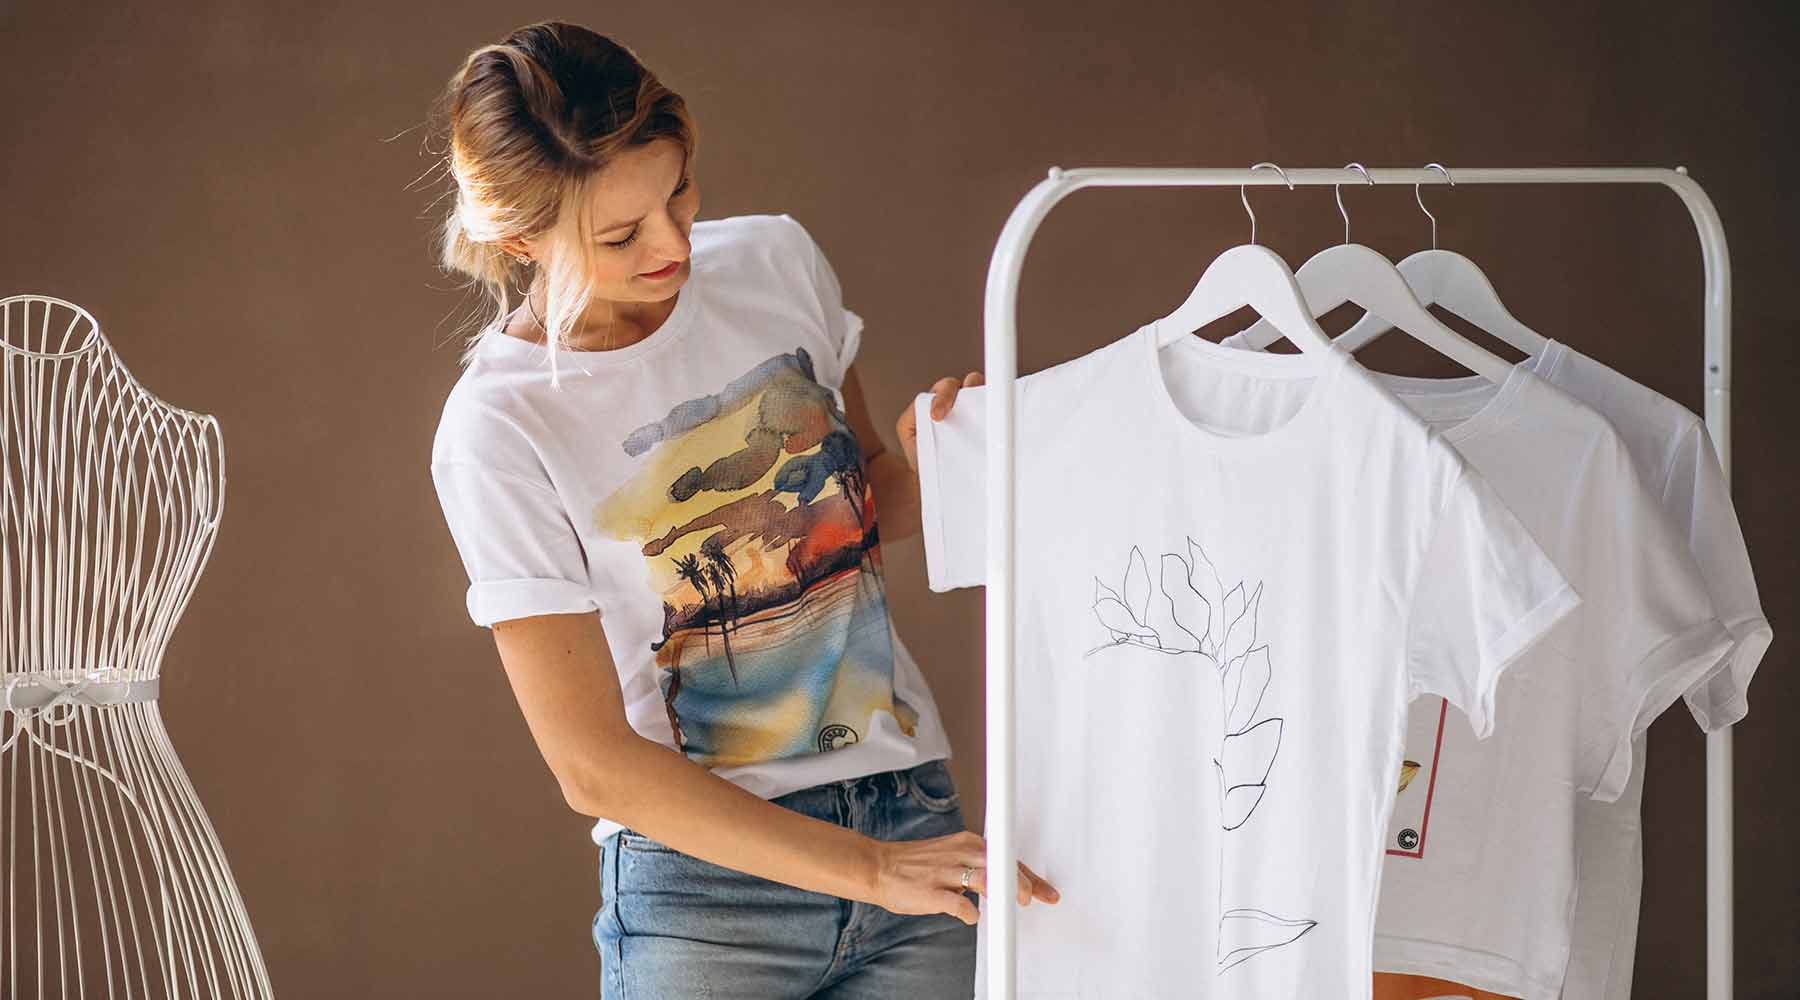 How to Sell T-Shirts Online: 10 Successful Start